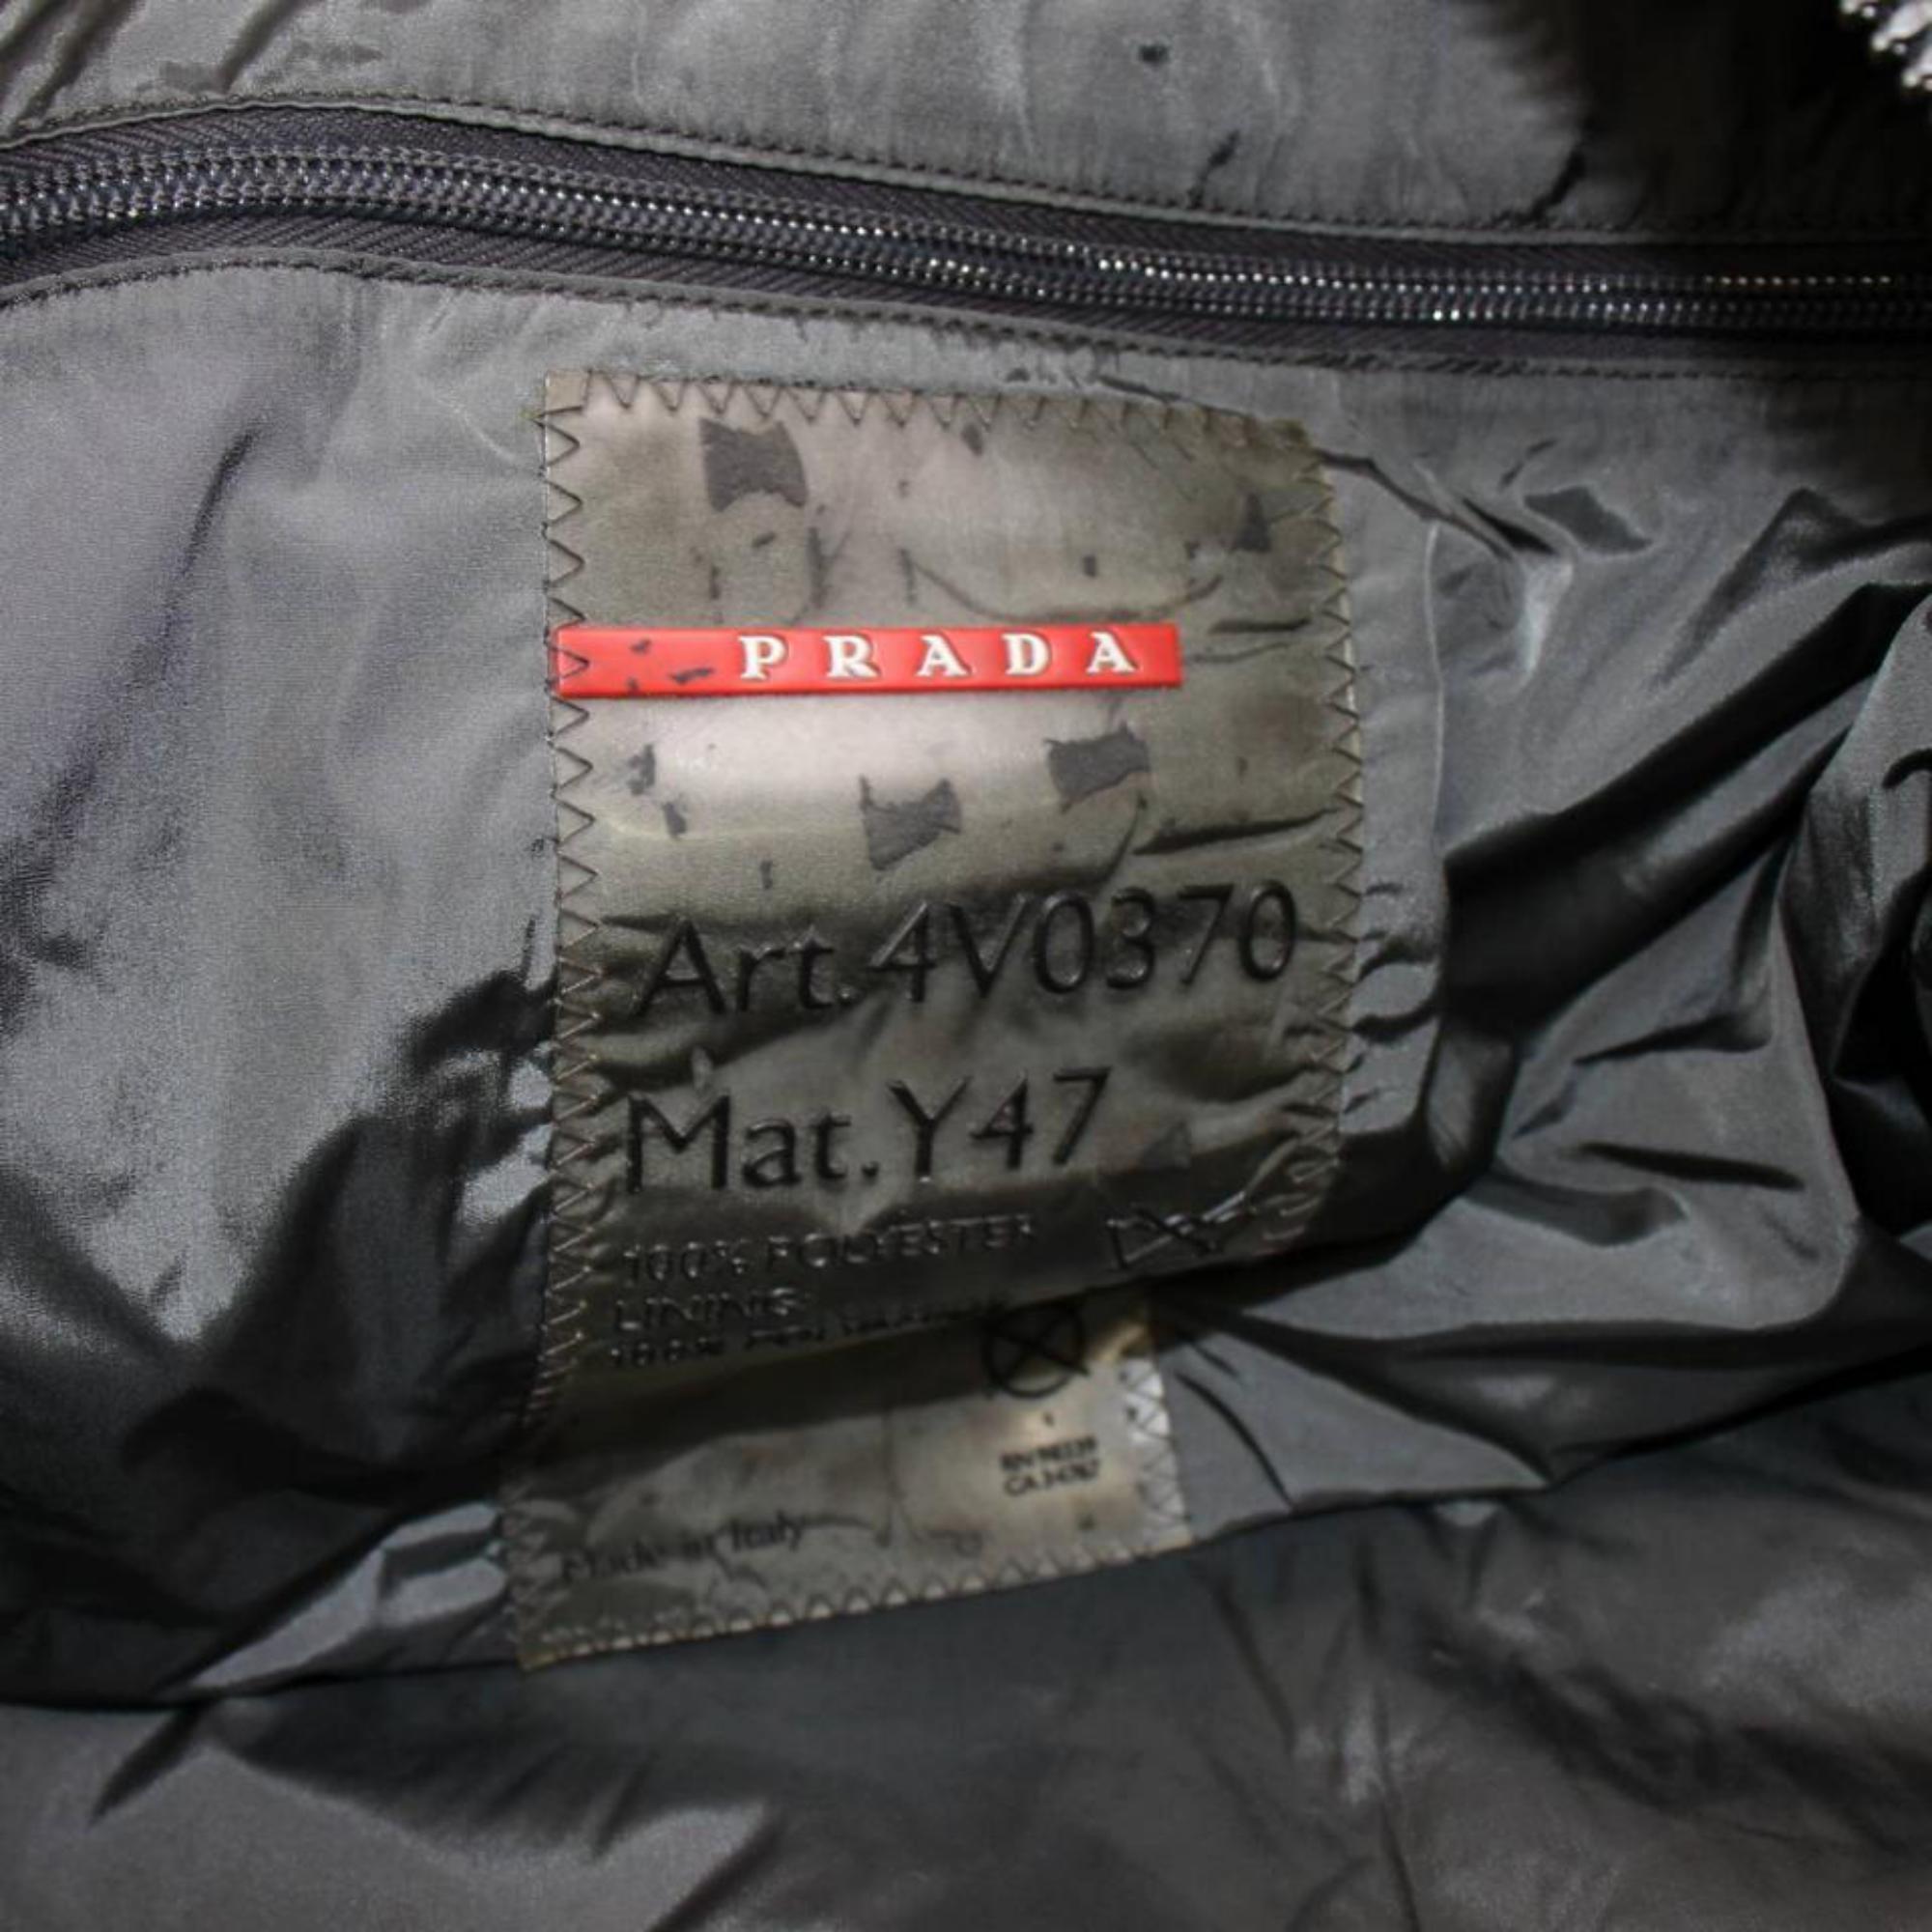 Prada 2way Sports Travel 868279 Black Nylon Messenger Bag In Good Condition For Sale In Forest Hills, NY